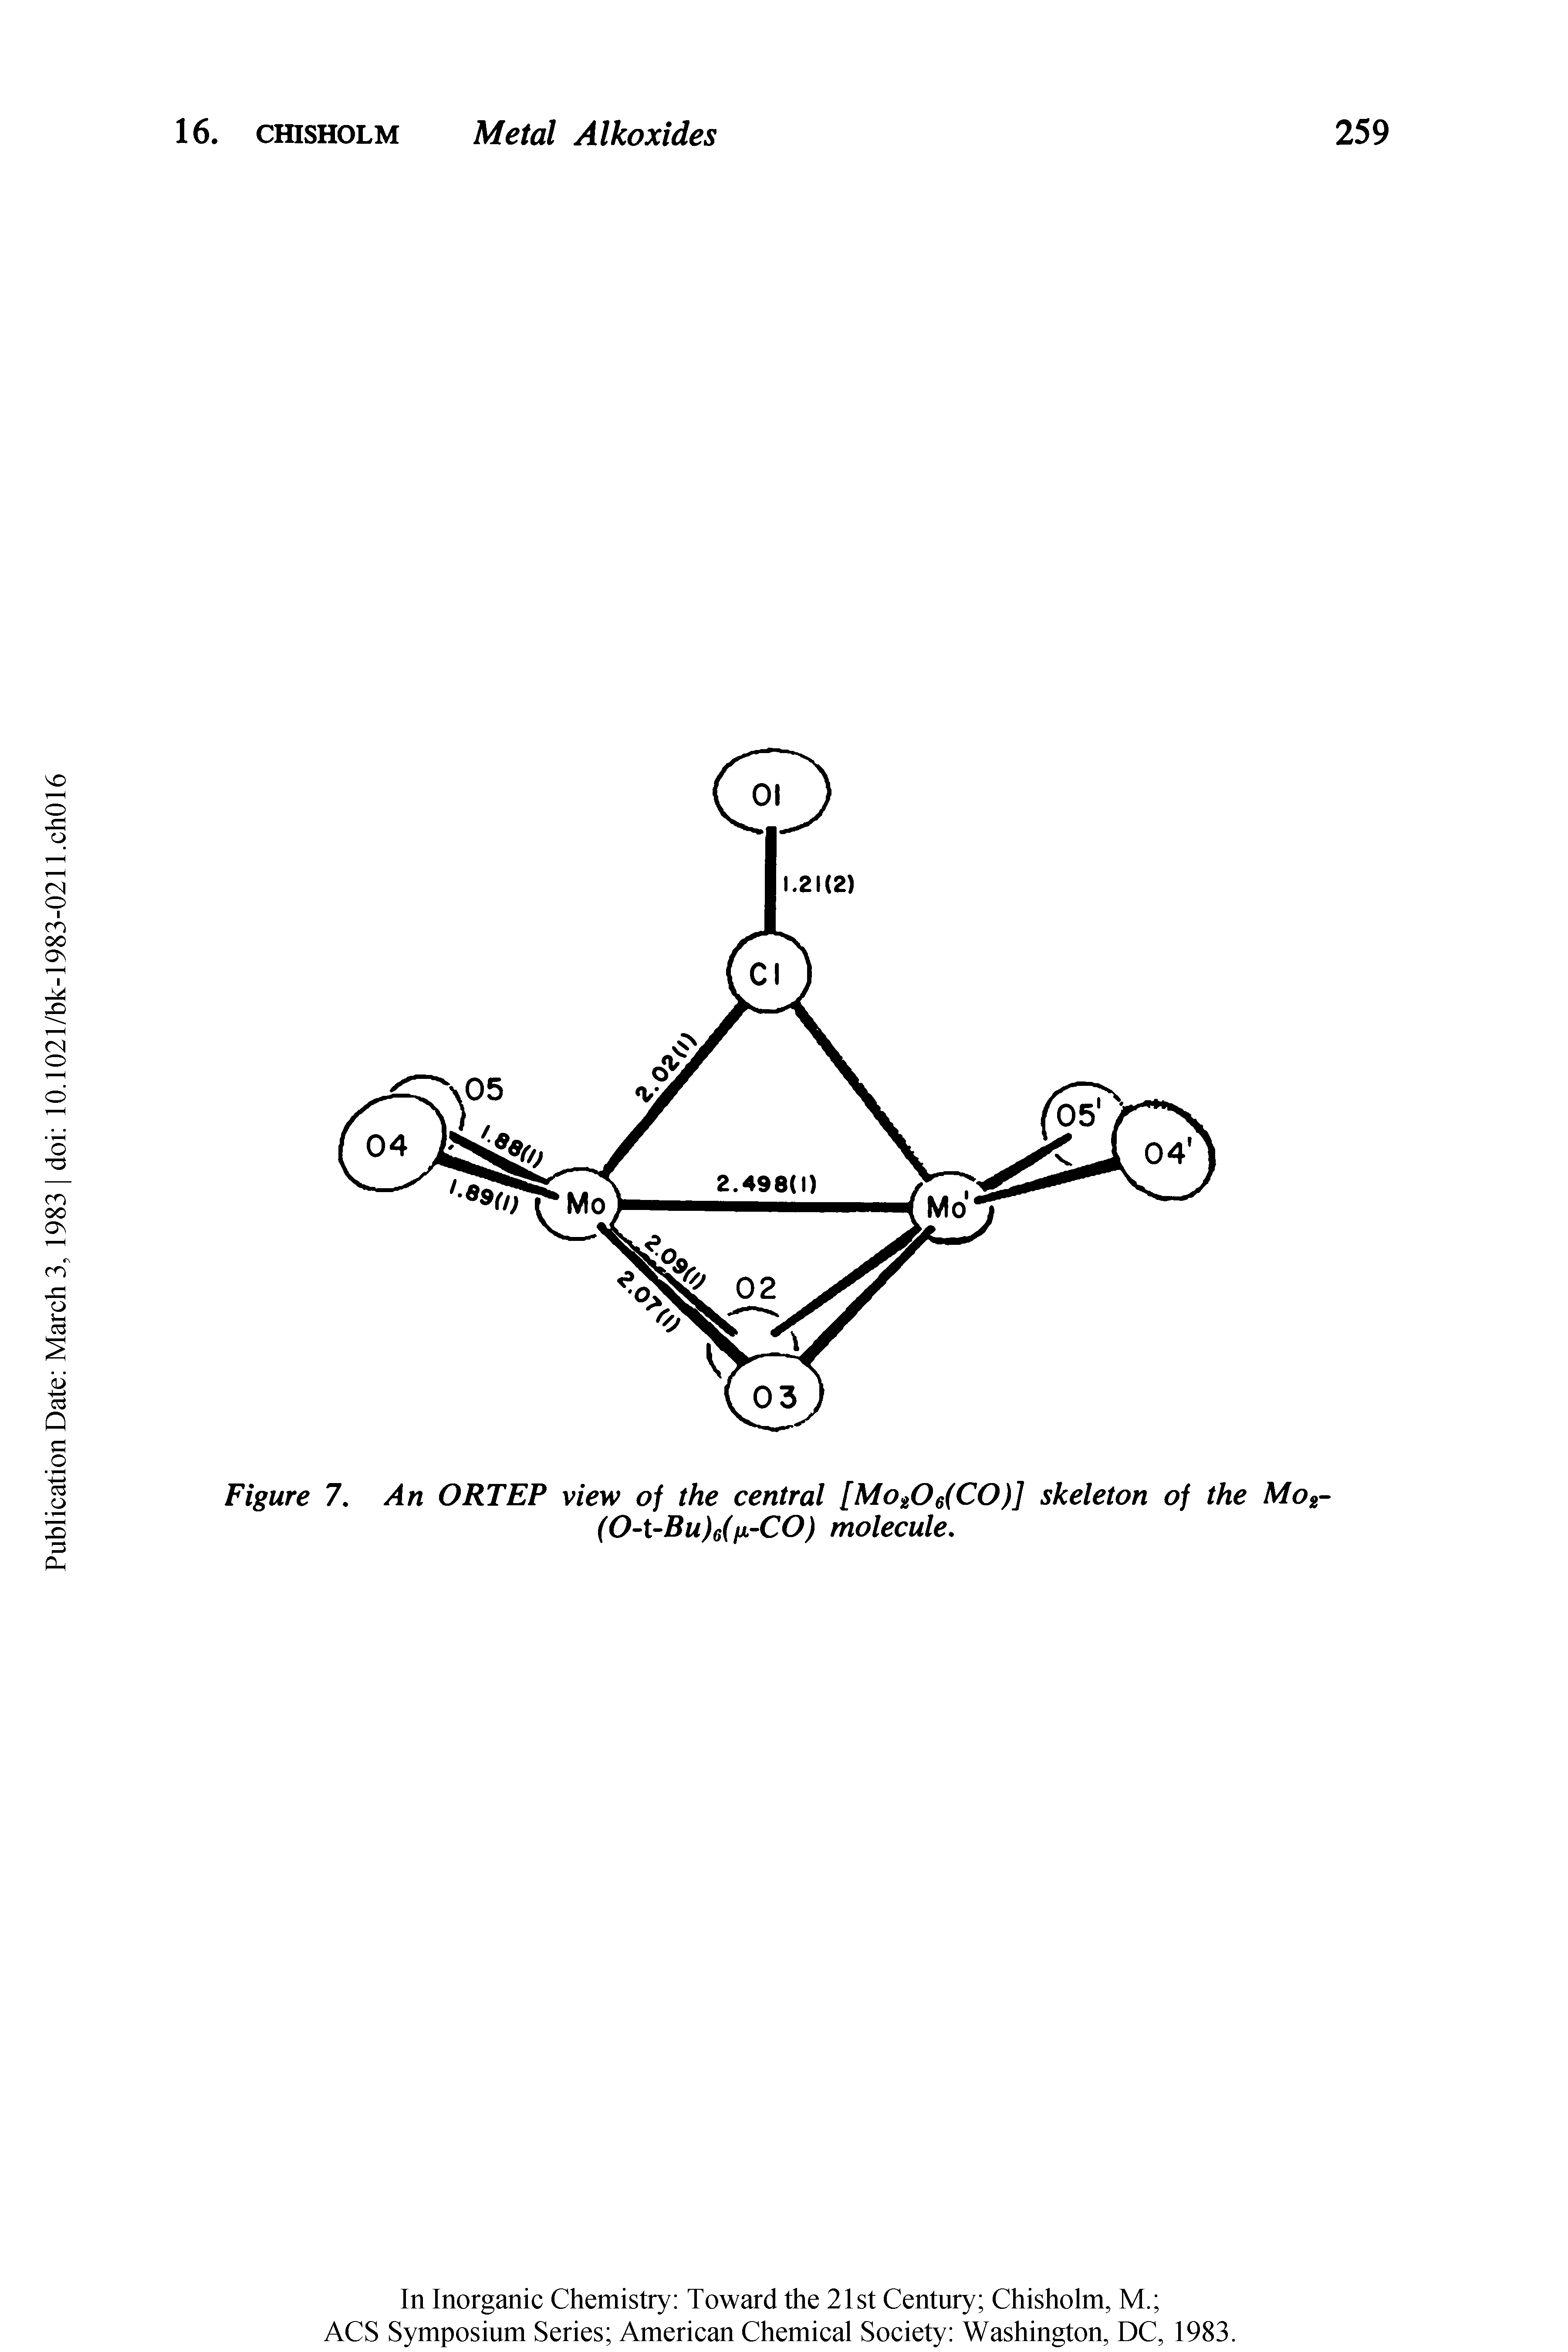 Figure 7. An ORTEP view of the central [Mo206(CO)] skeleton of the Mo2-(O-t-Bu)6(fi-CO) molecule.